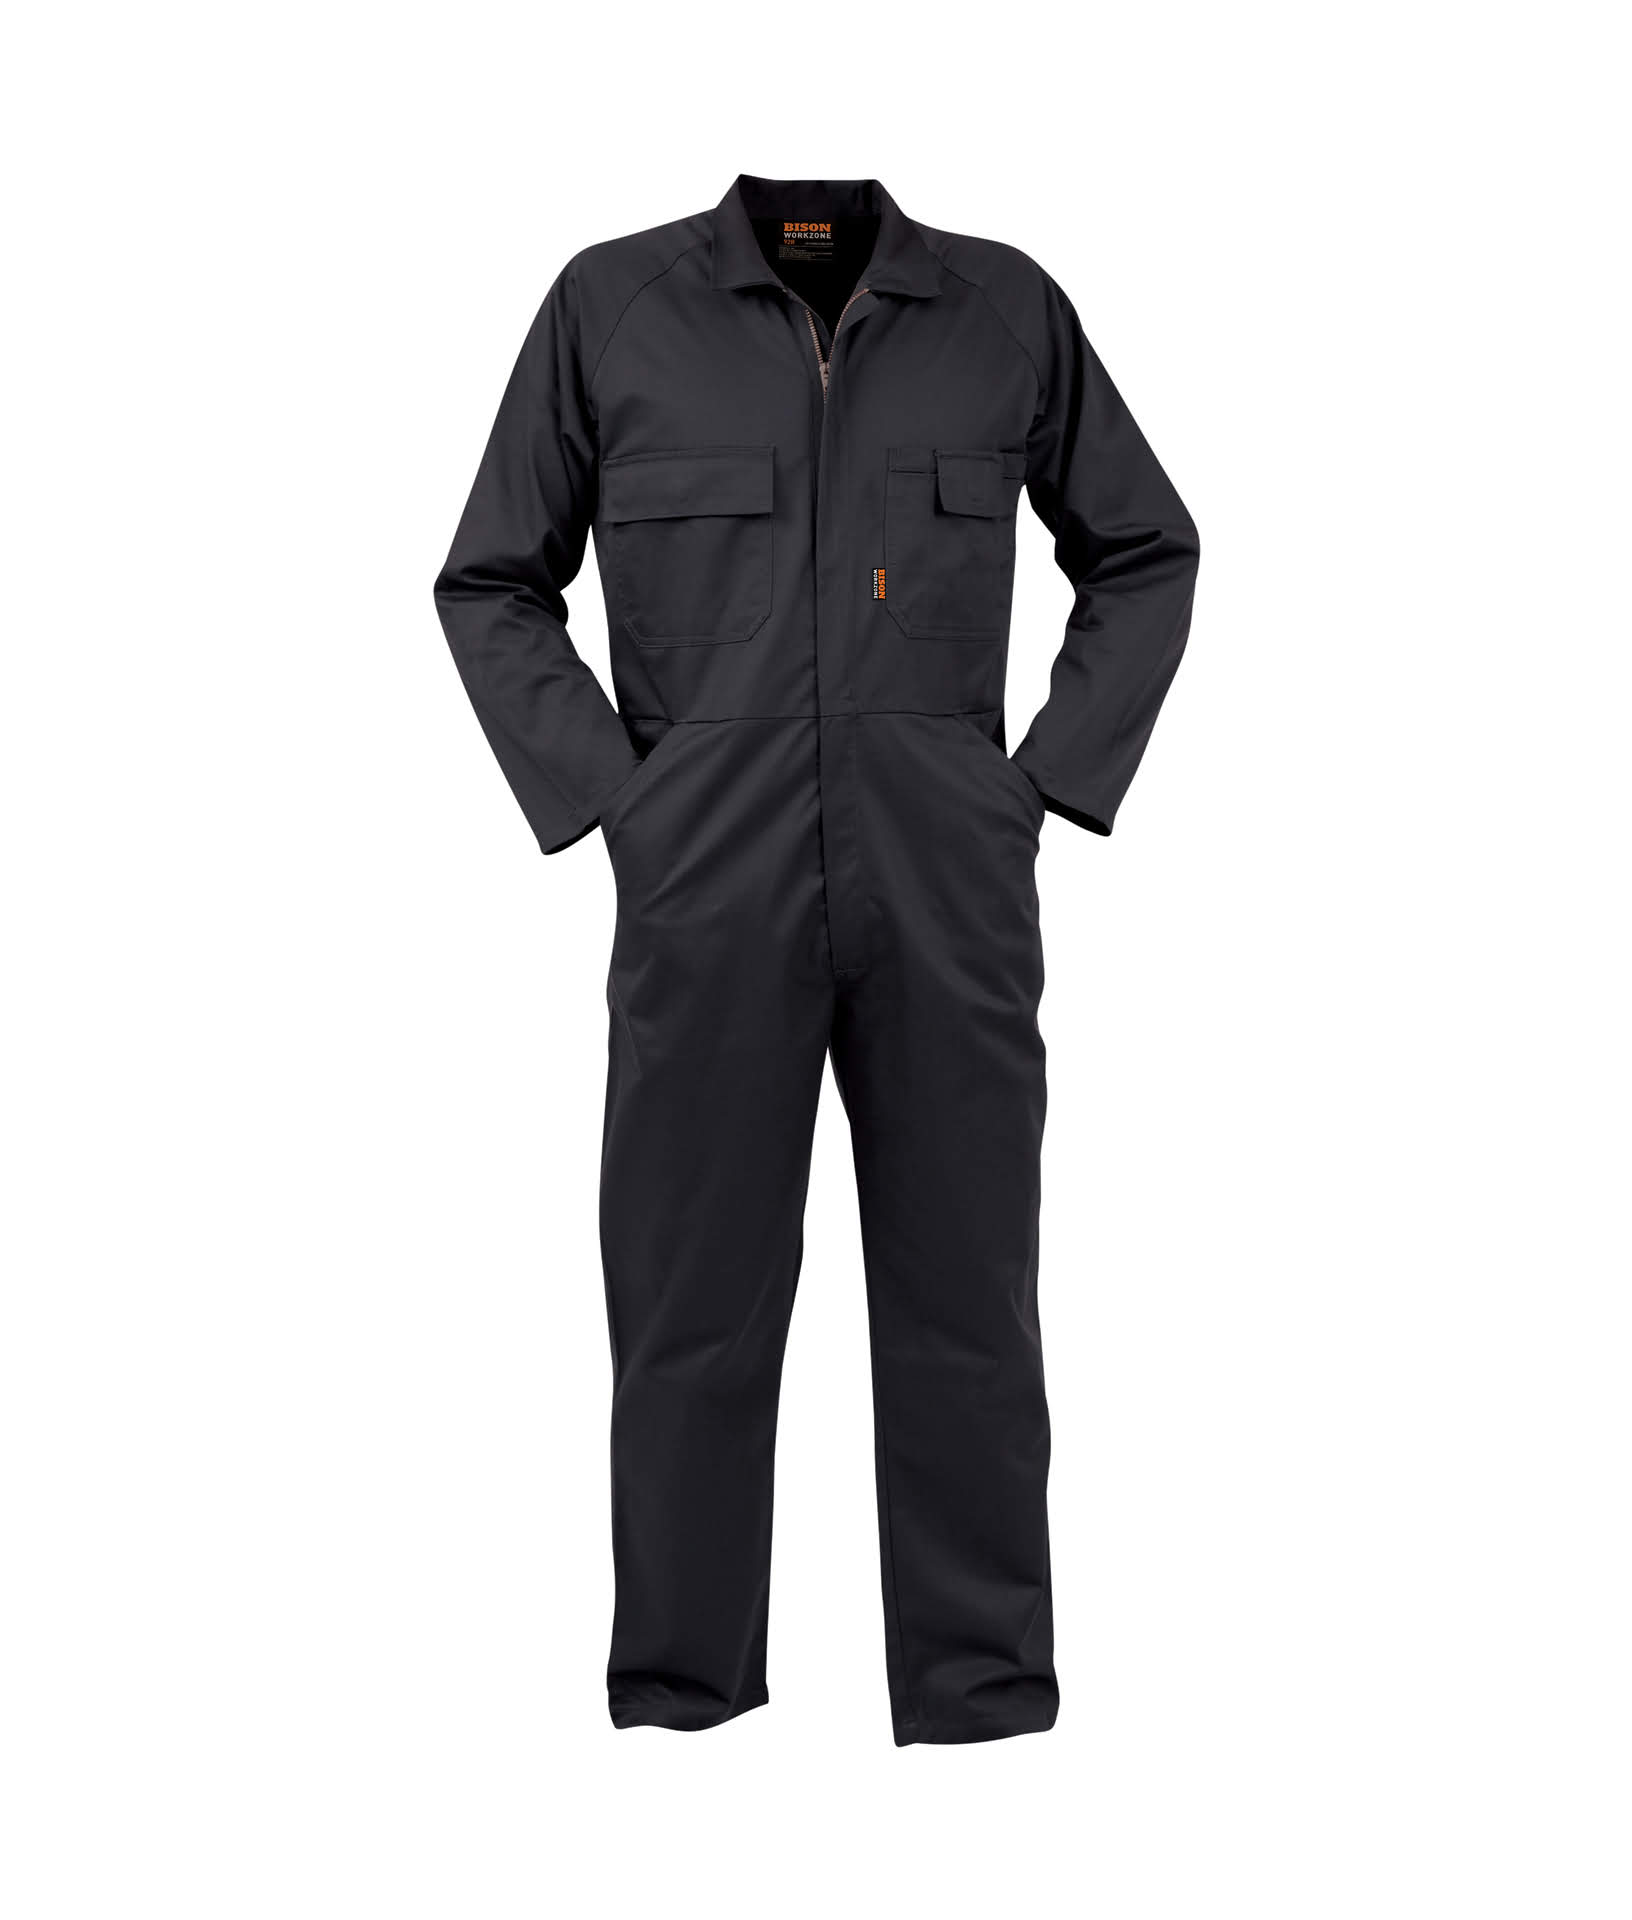 BISON Workzone 260gsm Charcoal Polycotton Zip Overall (COZPC)